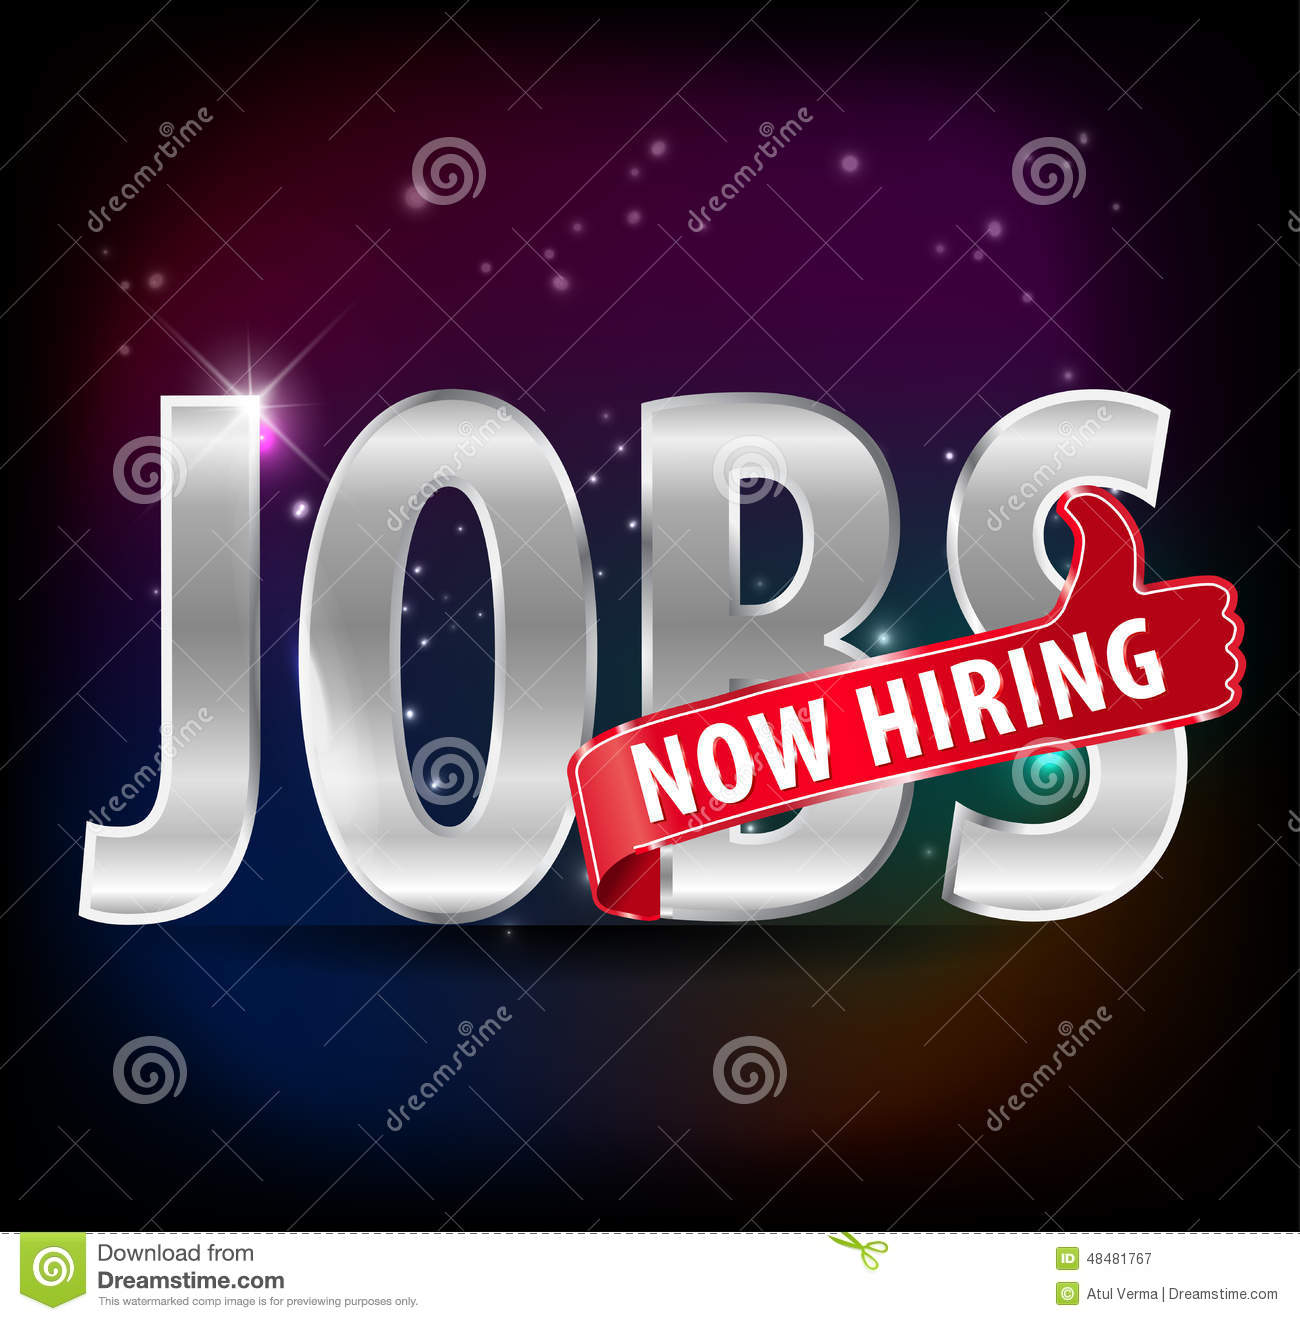 Created Jobs Opening Now Hiring Red Thumbs Up Advertising Job Offered